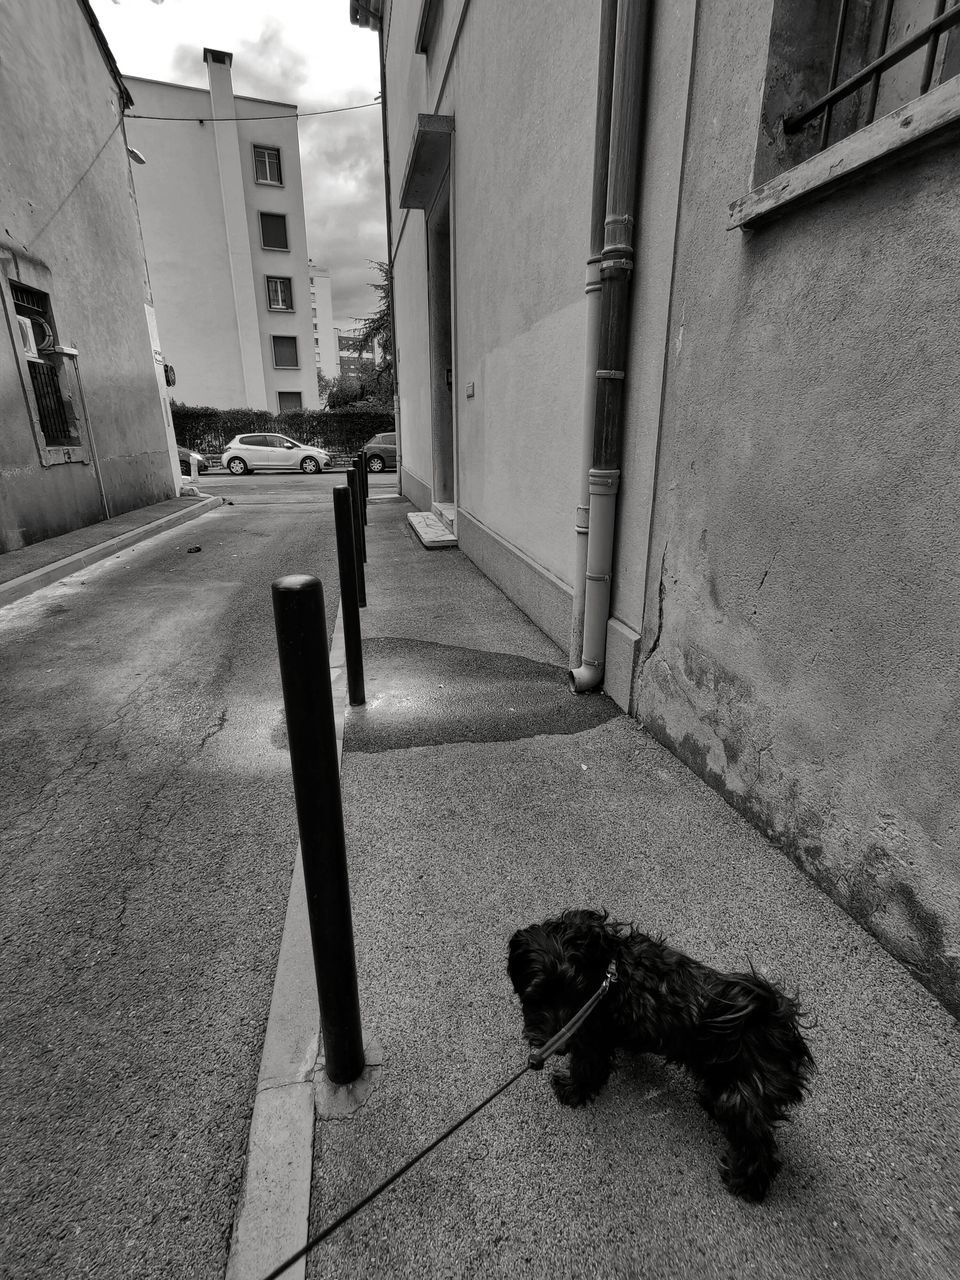 VIEW OF A DOG ON ALLEY